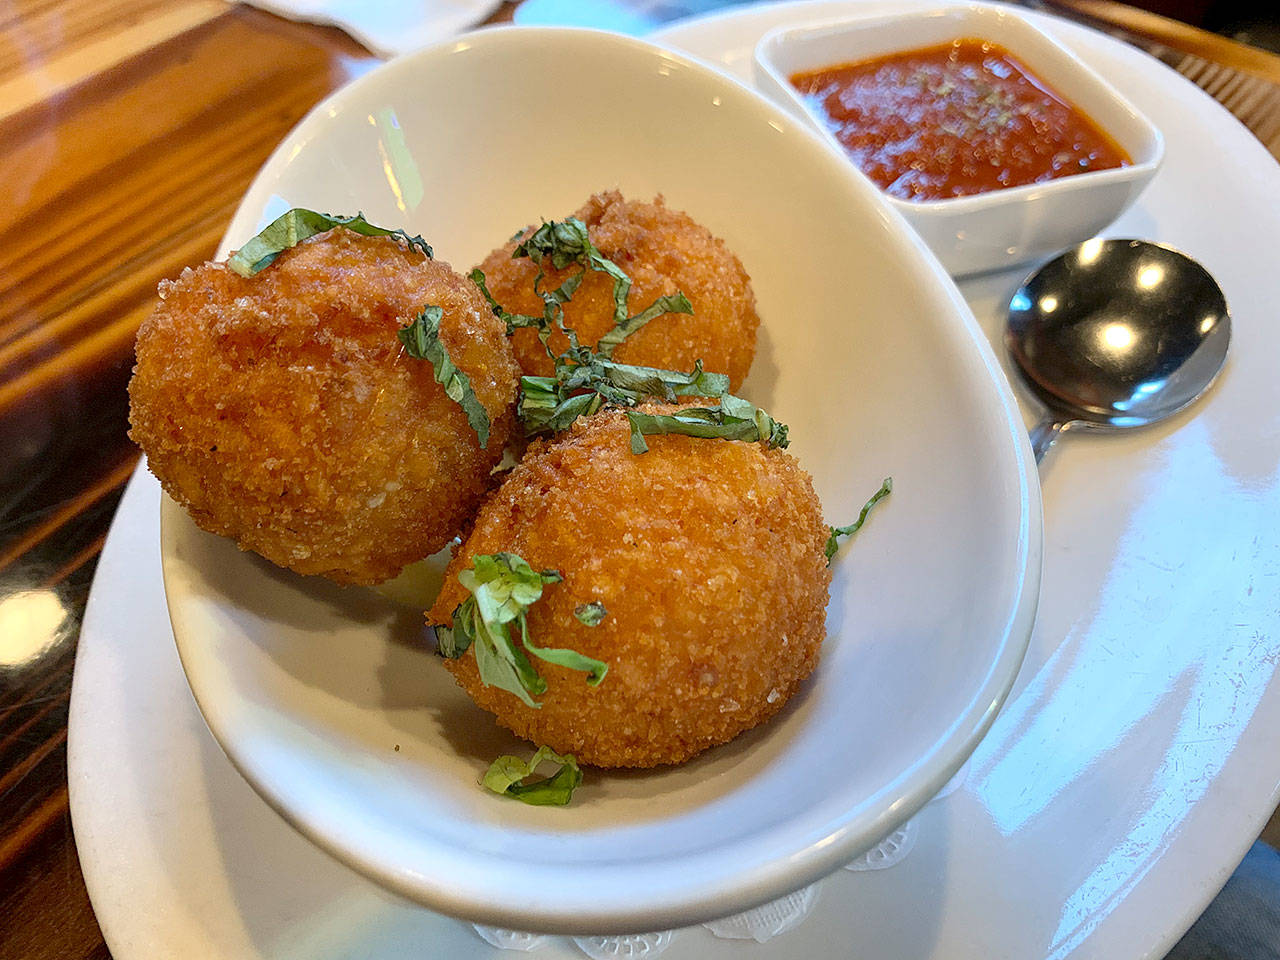 Arancini are rice balls stuffed with arborio rice, mozzarella cheese, parsley and parmesan cheese, then fried. (Evan Thompson / The Herald)